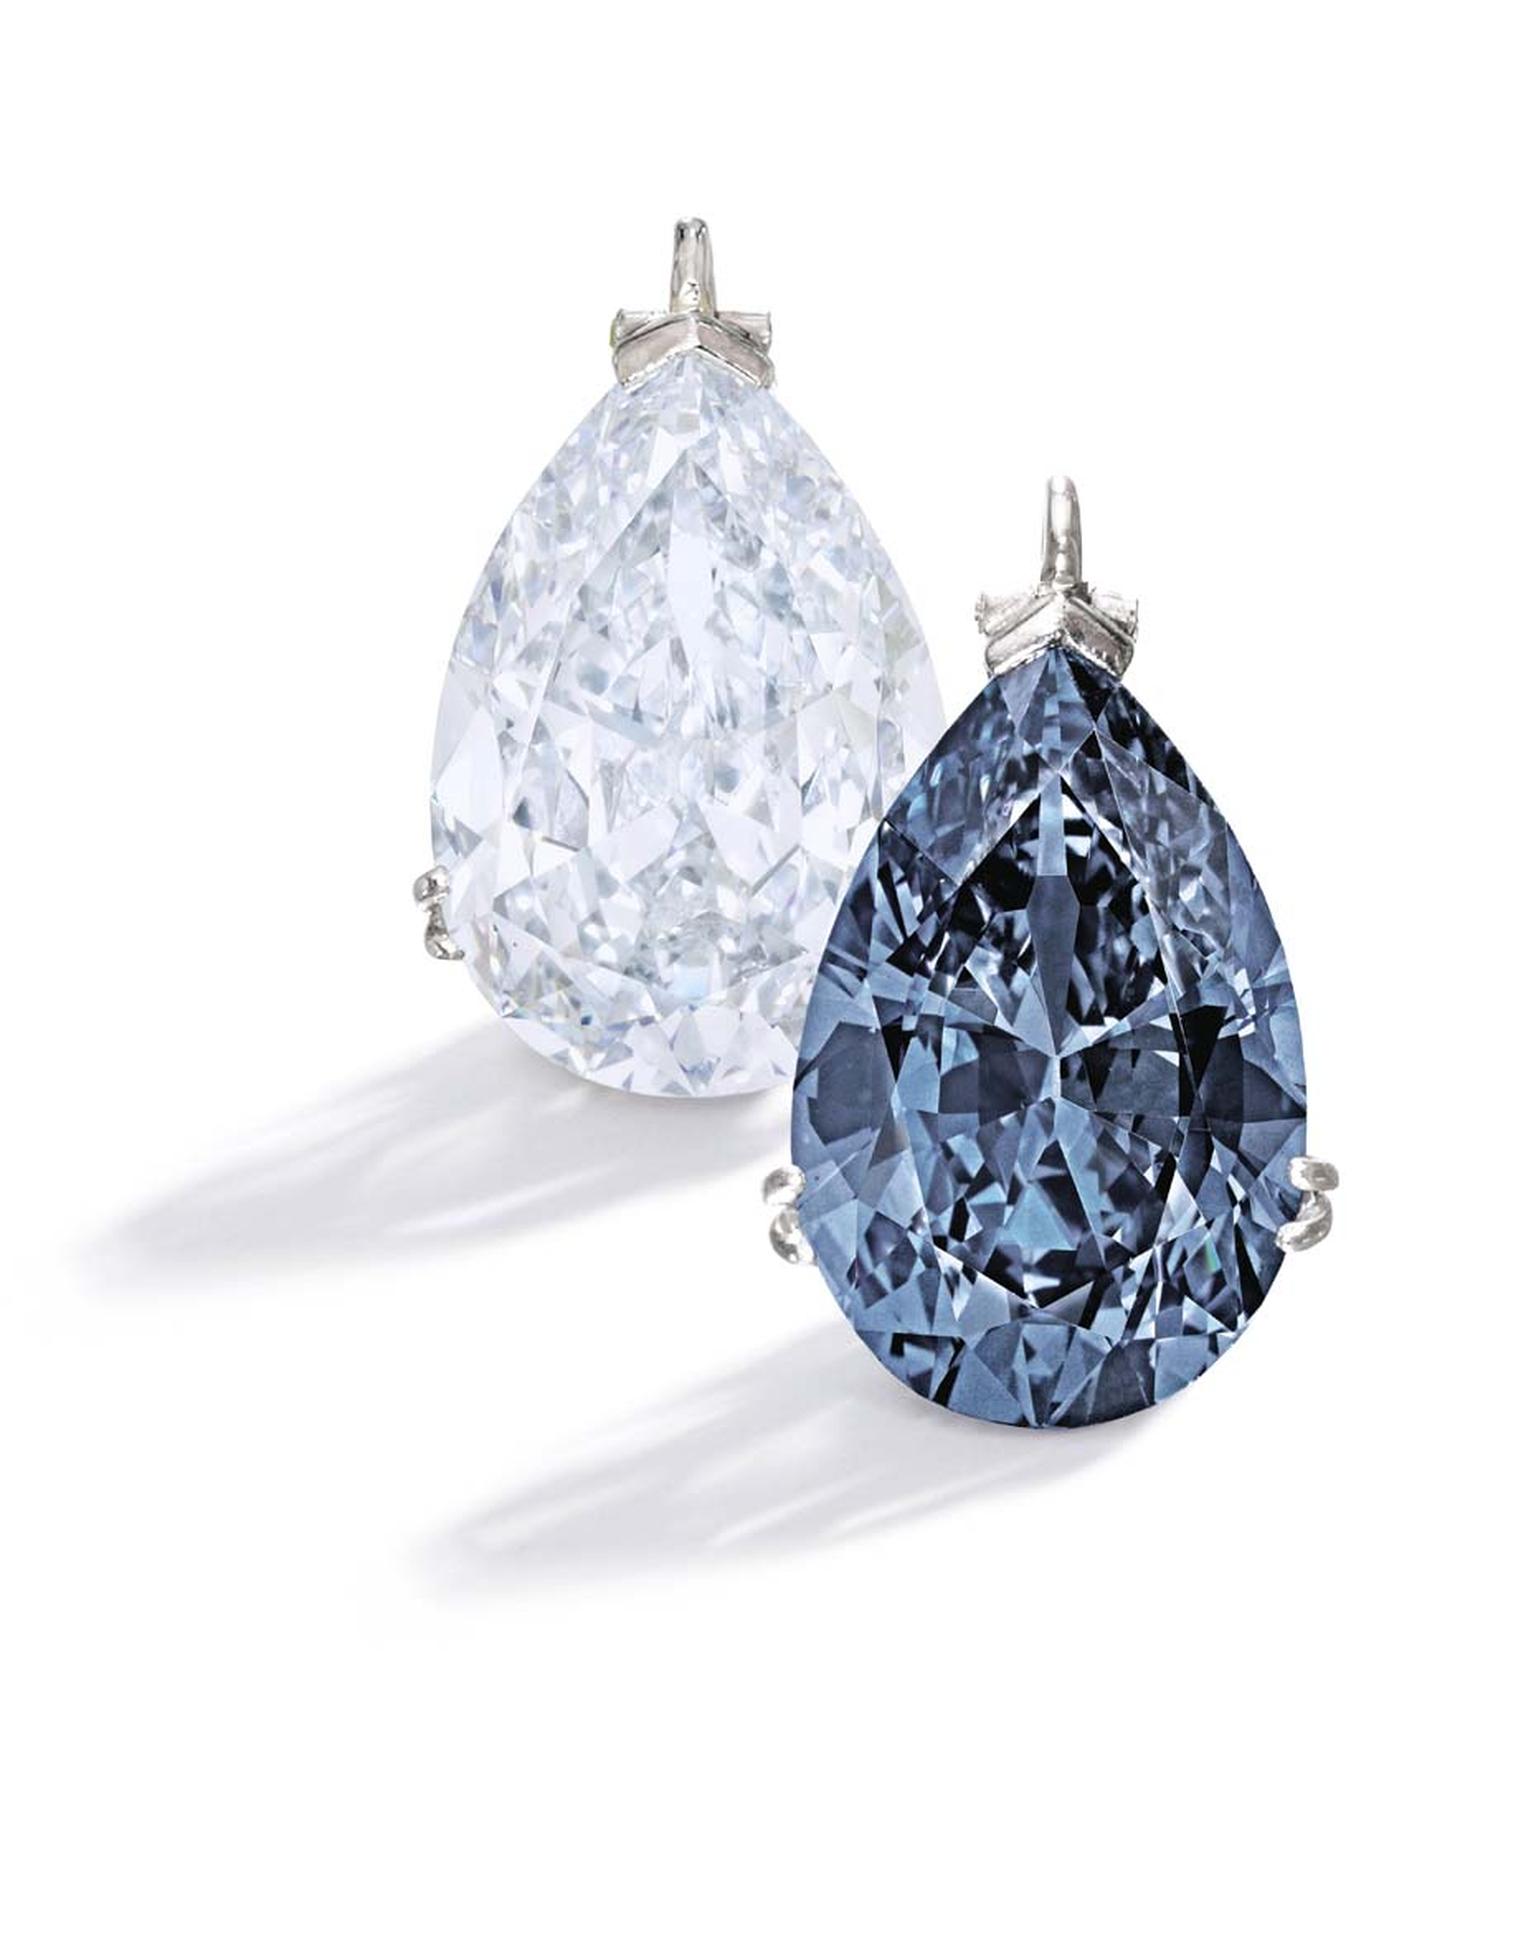 The 9.74ct Fancy Vivid blue diamond was bought by a private collector from Hong Kong who fought off competition from six other bidders during a tense 20-minute auction and went on to christen the record-breaking stone "The Zoe Diamond".